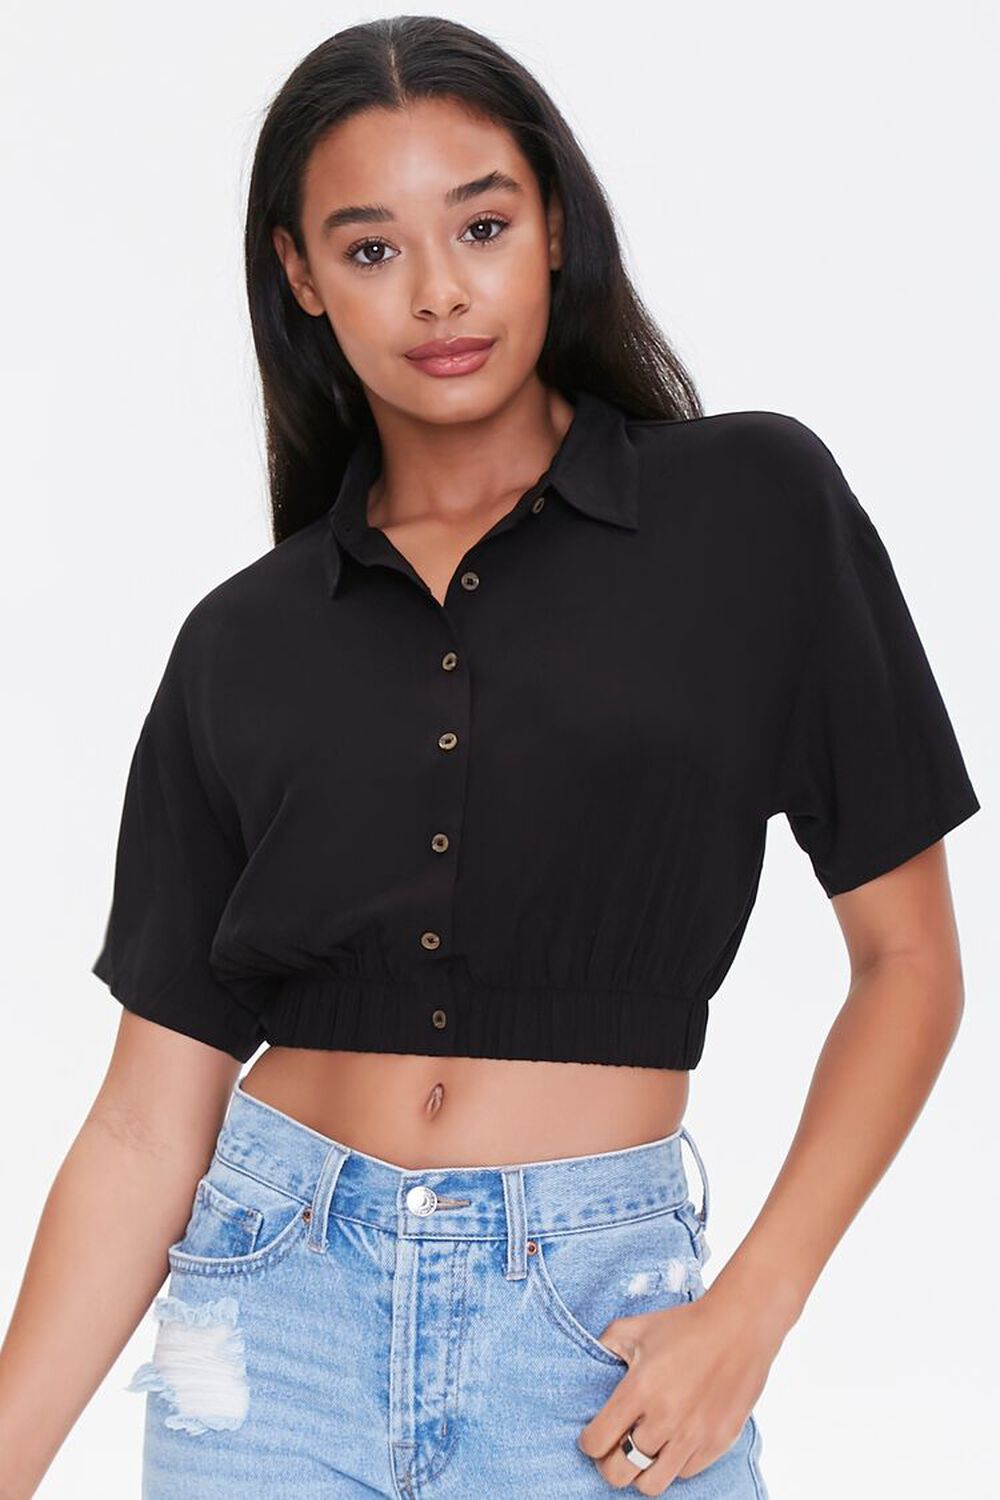 BLACK Cropped Button-Up Shirt, image 1